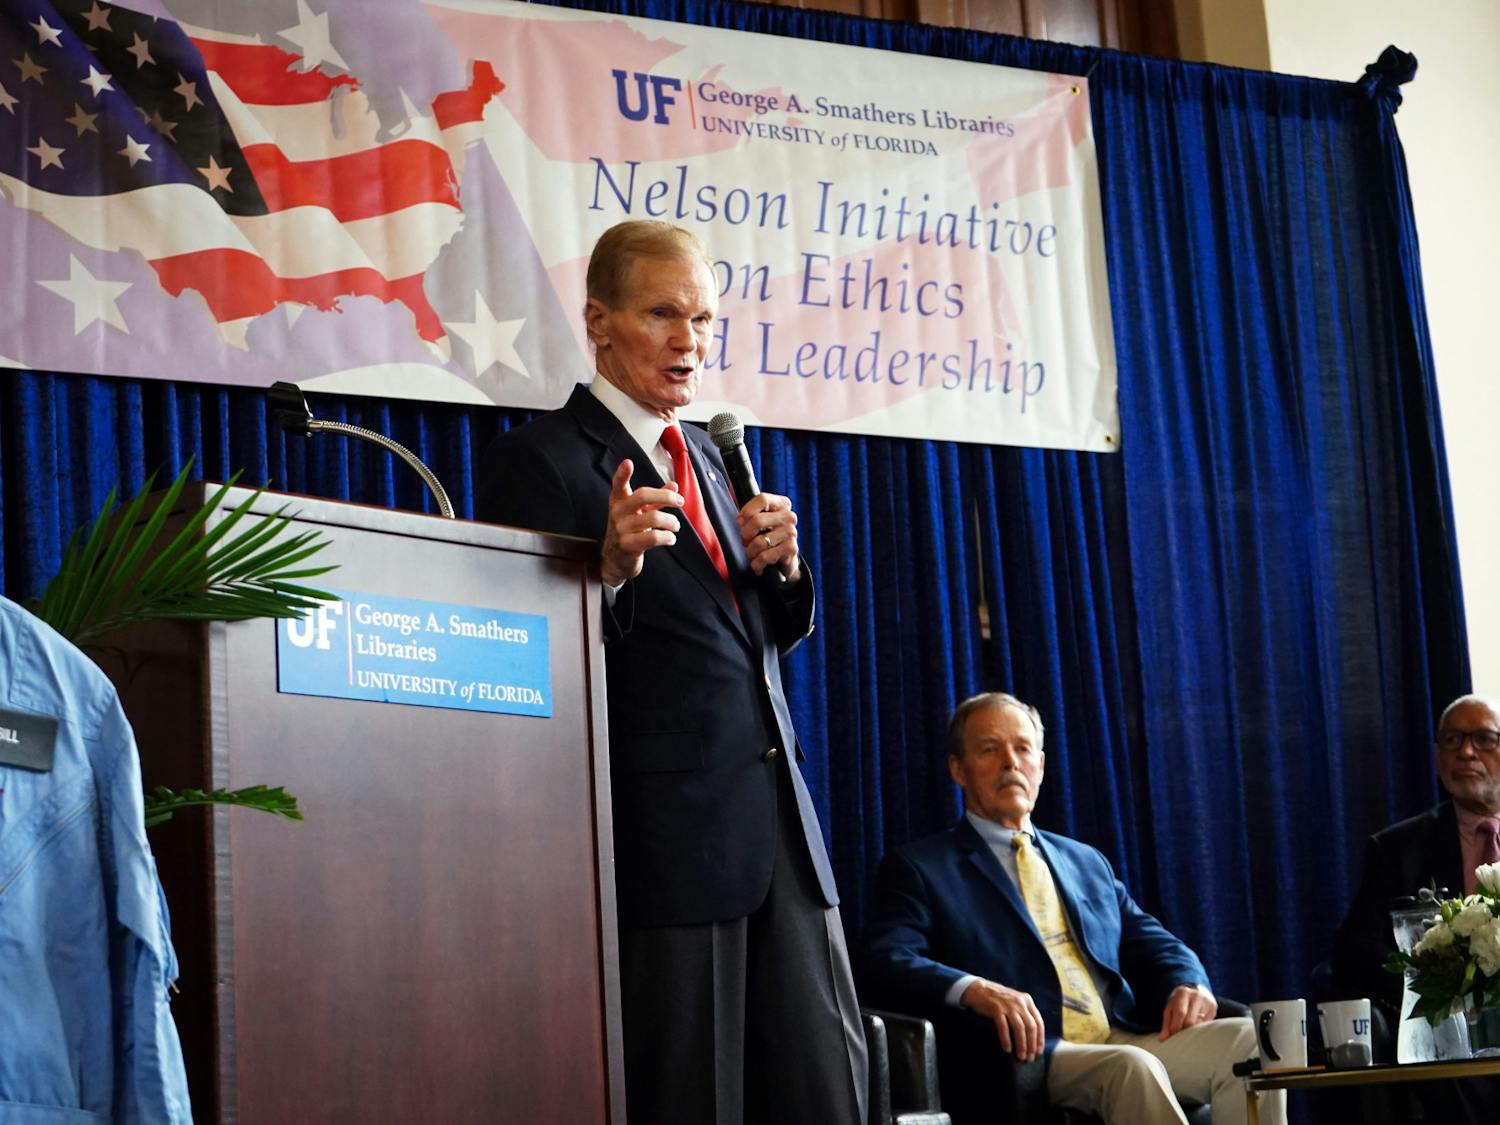 At UF&#x27;s Smathers Library Grand Reading Room, Bill Nelson, former U.S Senator for Florida and current administrator for NASA, speaks at the Nelson Initiative on Ethics and Leadership. Nelson was joined by previous astronauts Charles Bolden and Robert Gibson Friday, Feb. 17, 2023. 